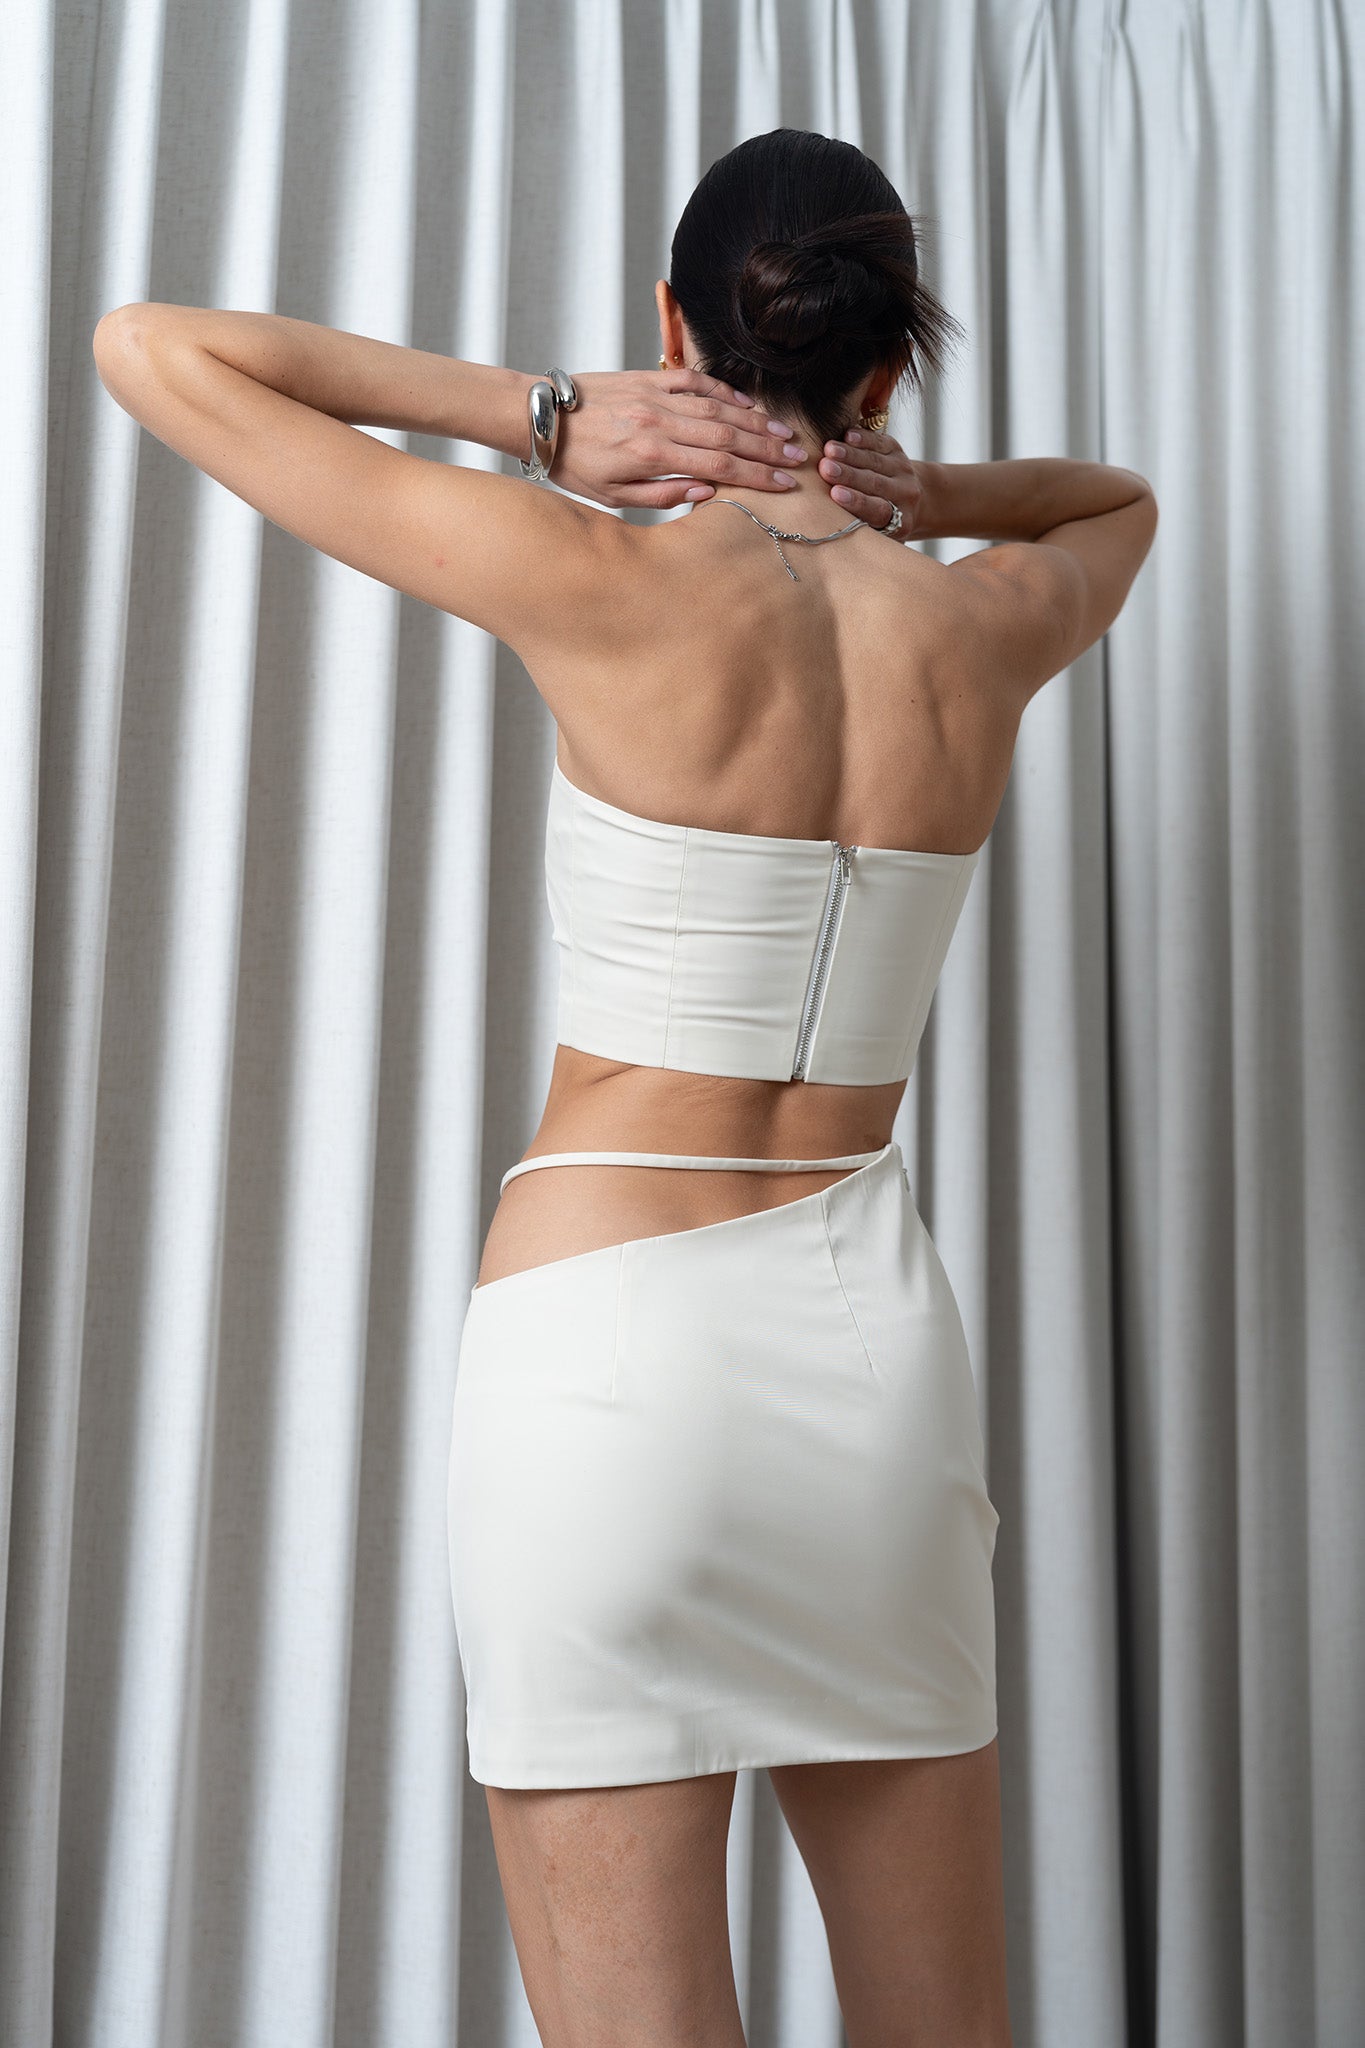 Xiaoyuan Gong New York The TENSION cutout strapless bra top paired with slim line tight mini skirt in white